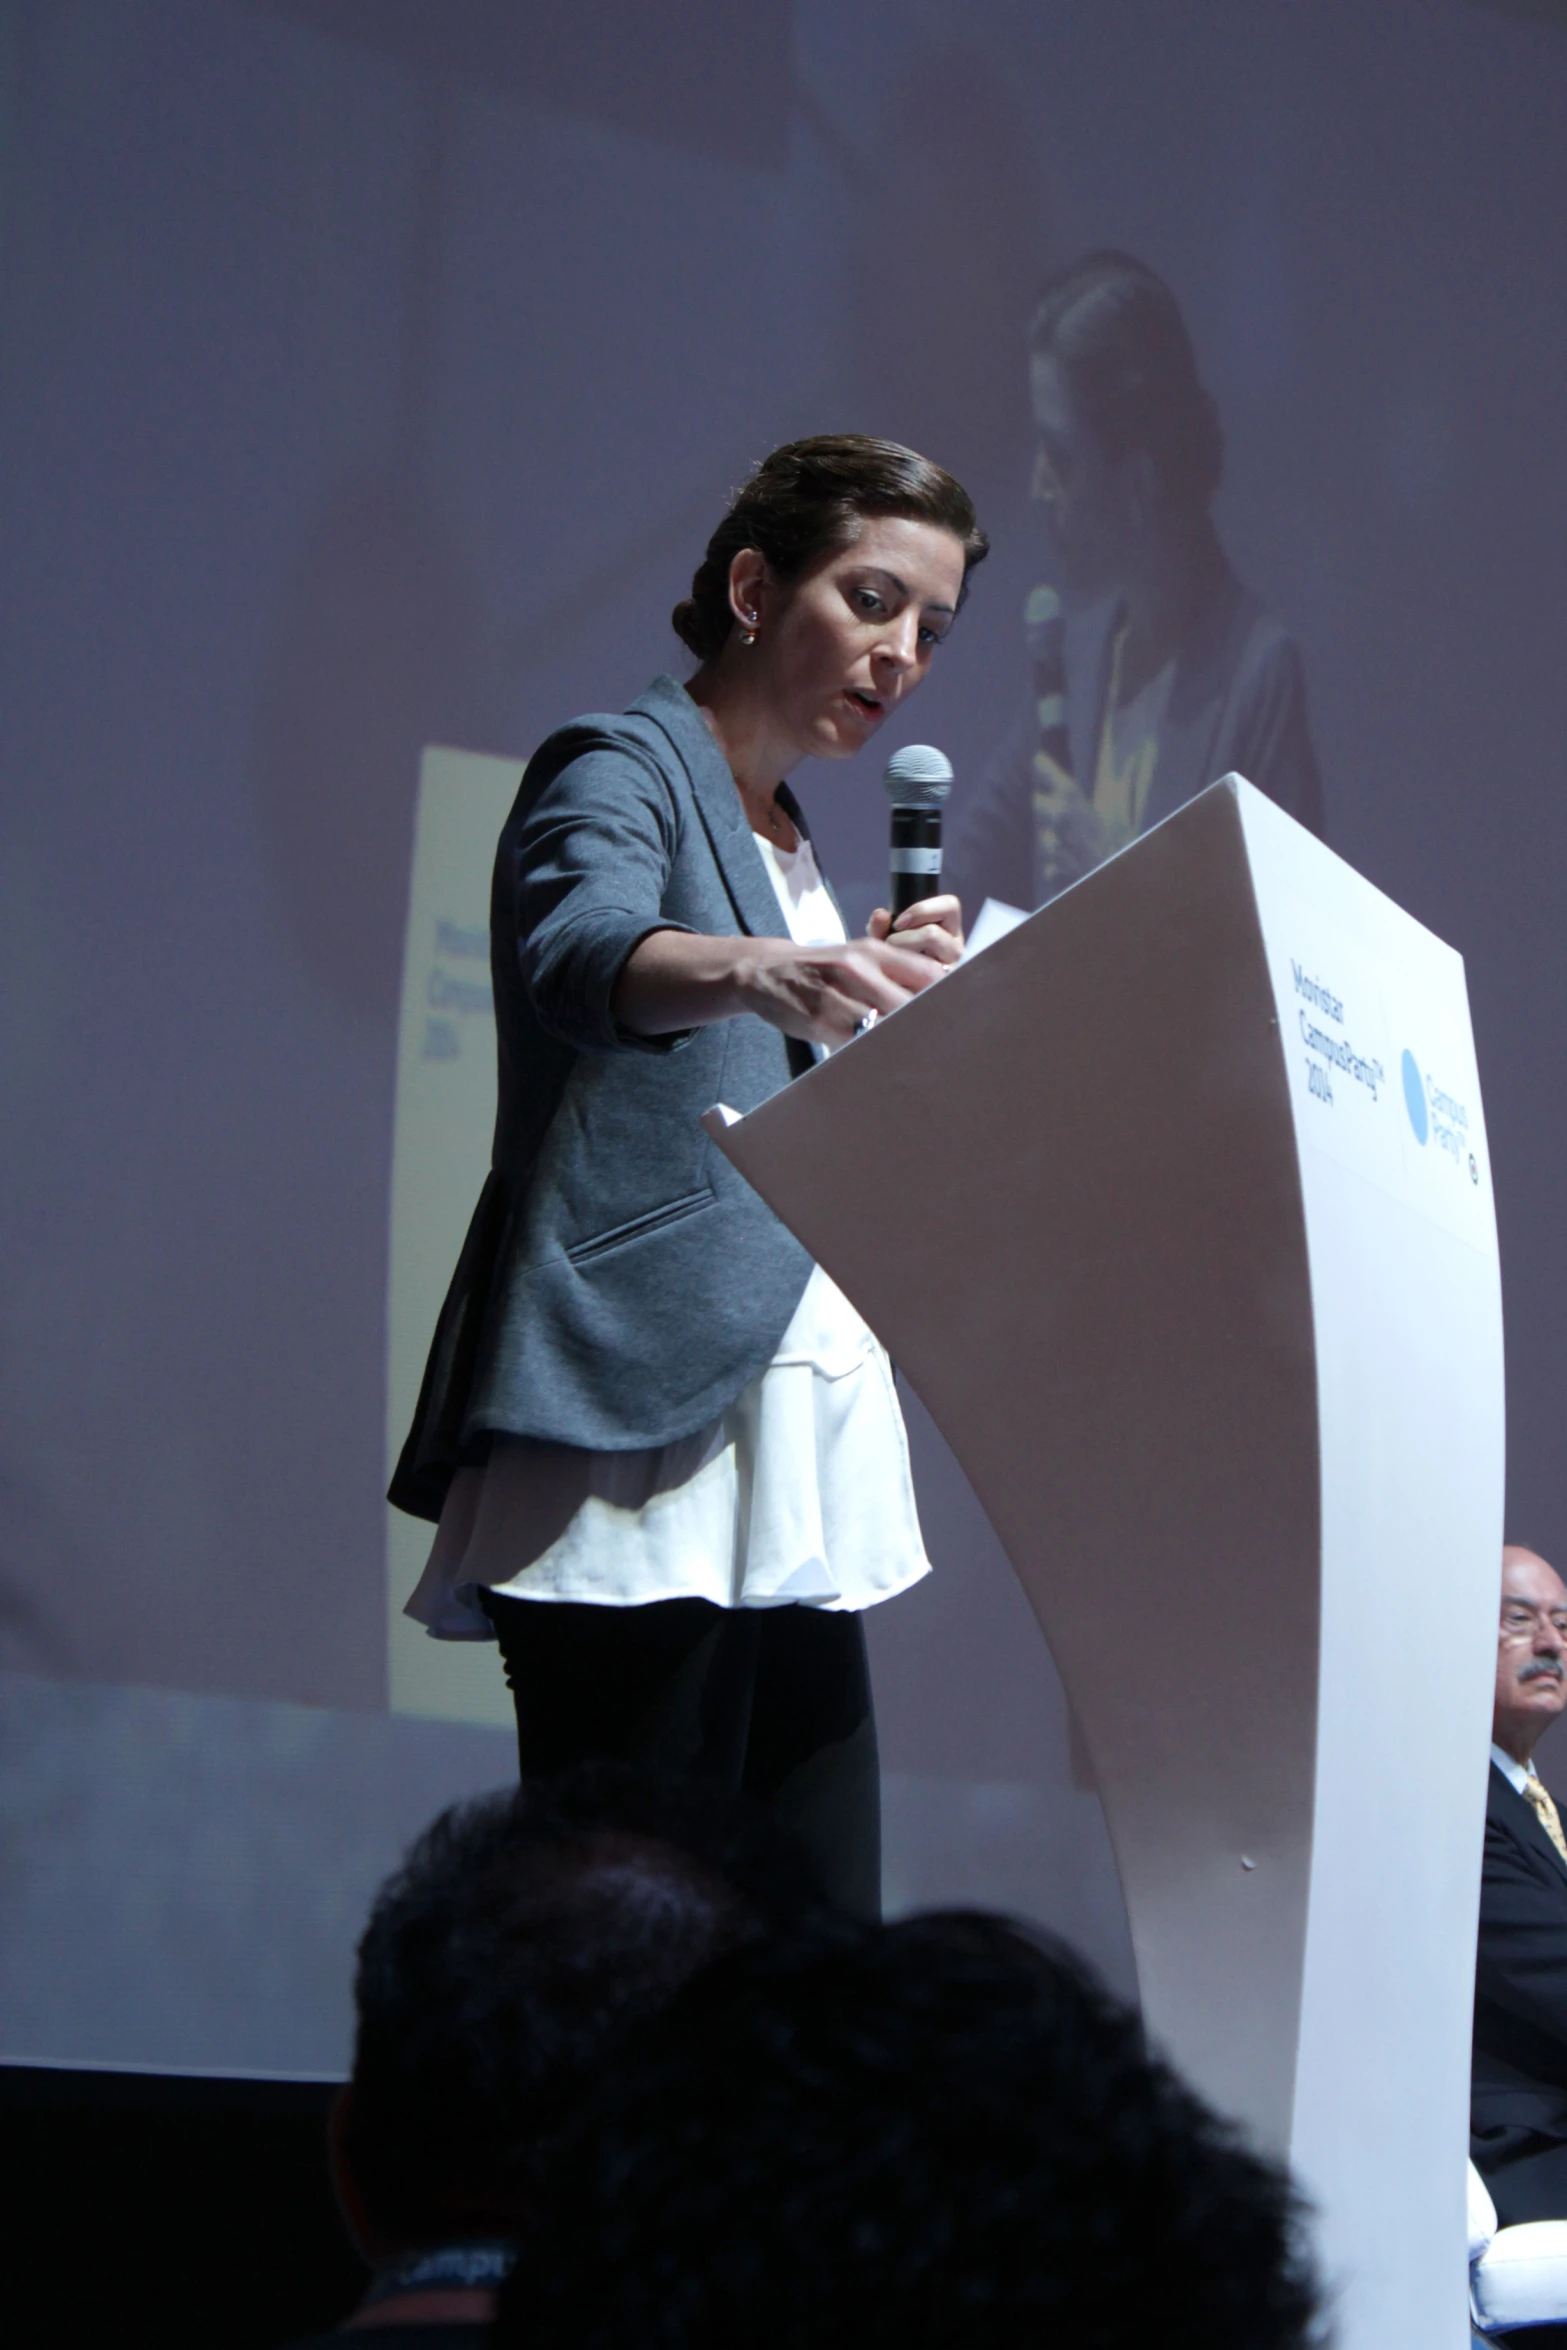 a woman in gray jacket speaking at podium